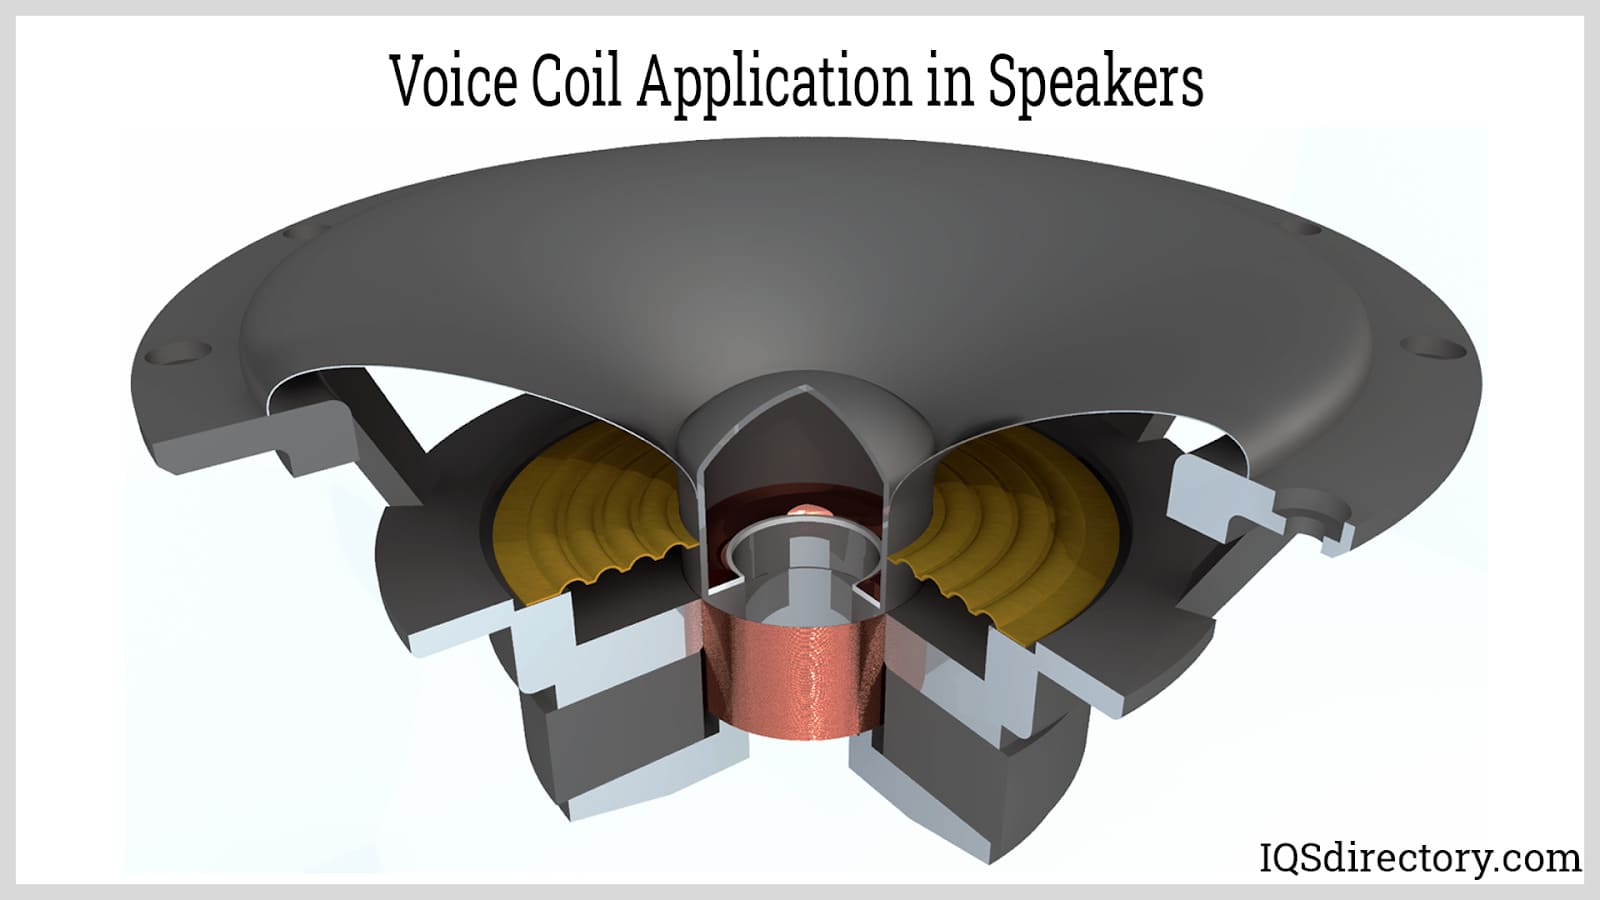 Voice Coil Application in Speakers